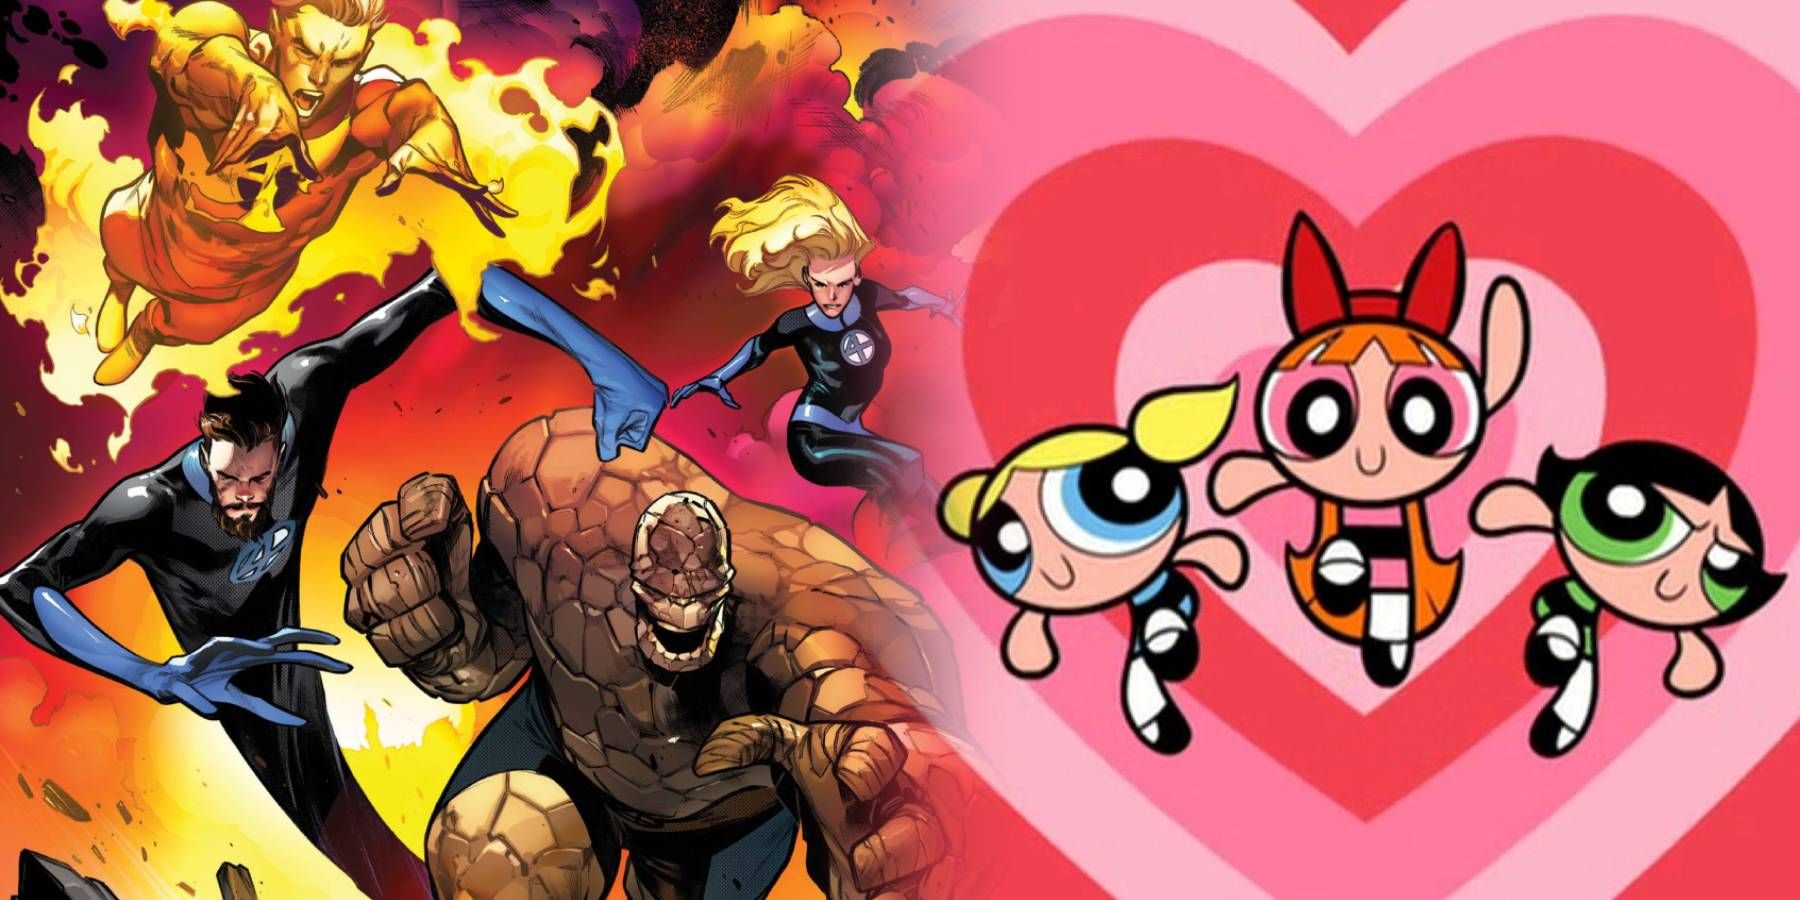 Comic artwork of Marvel's Fantastic Four with an image of the Powerpuff Girls